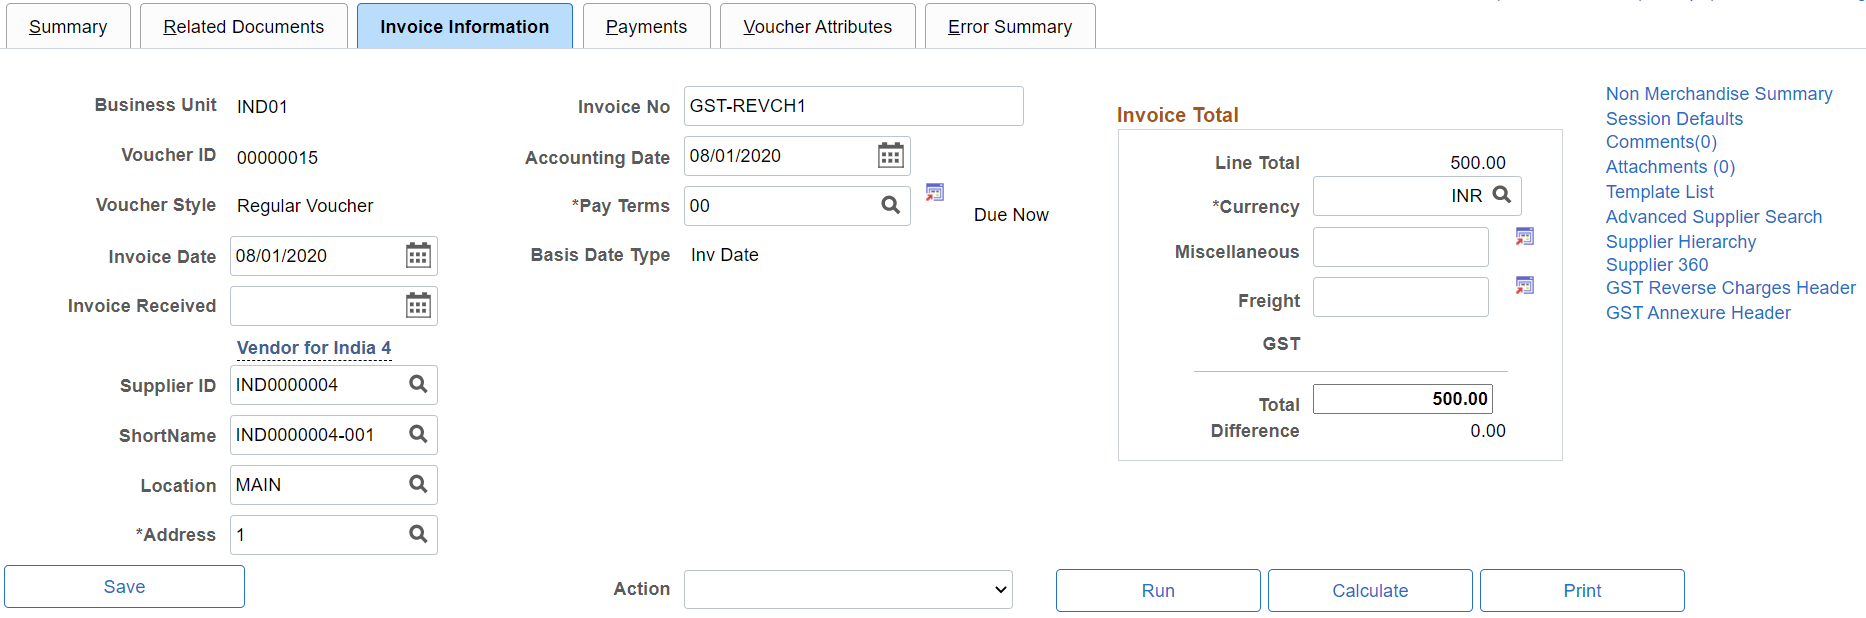 Invoice Information page for regular voucher style with Reverse Charge transaction (1 of 2)